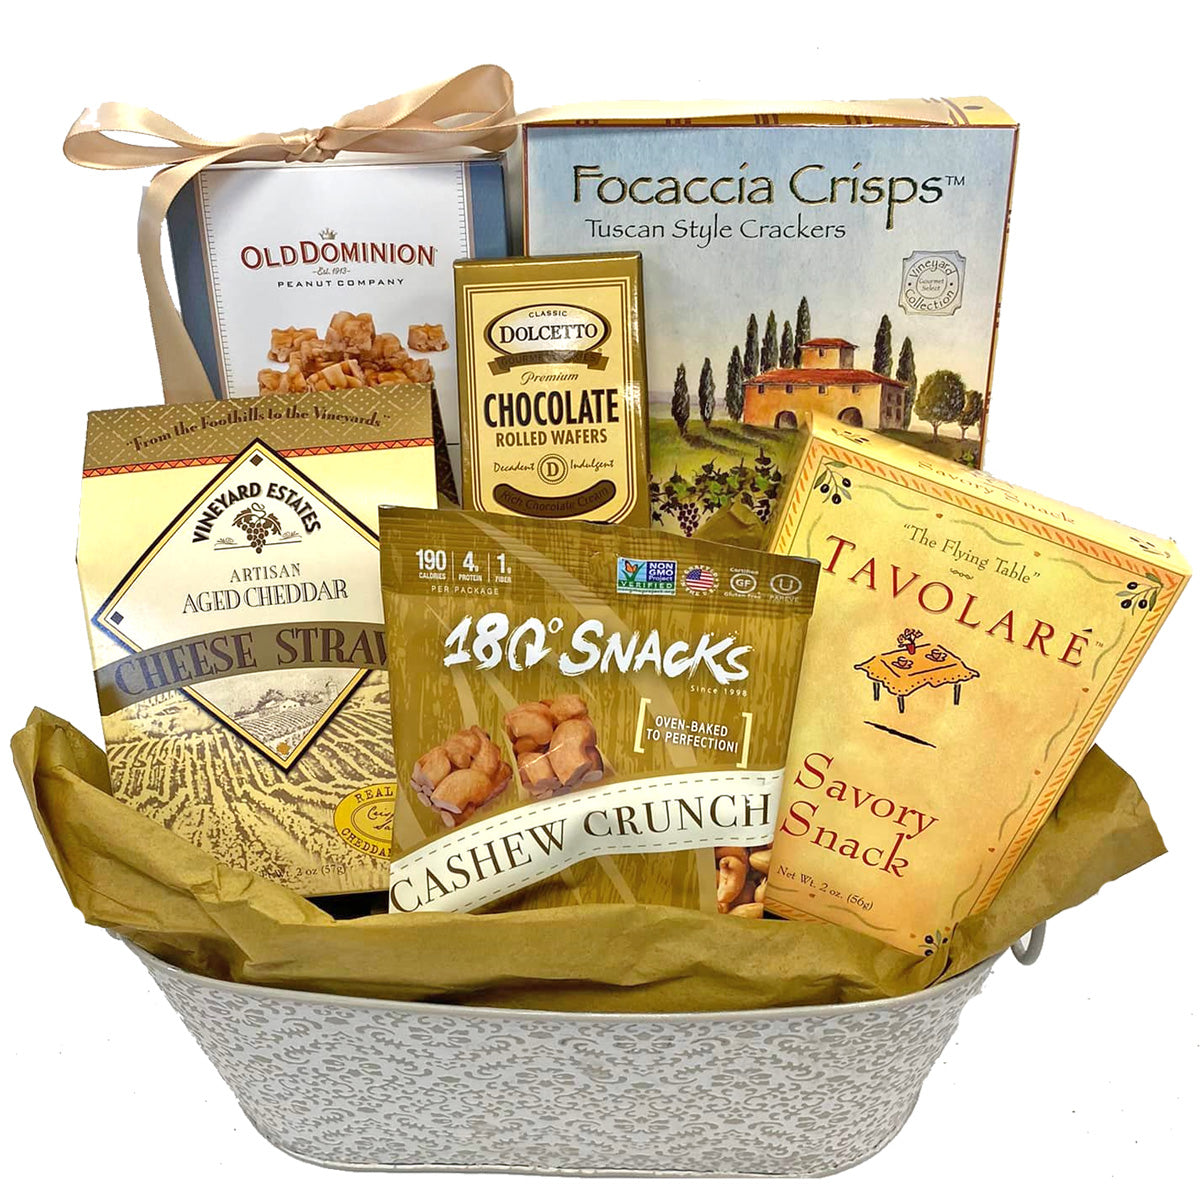 Gratitude Gourmet Gift Basket Says Thank You for All You Do